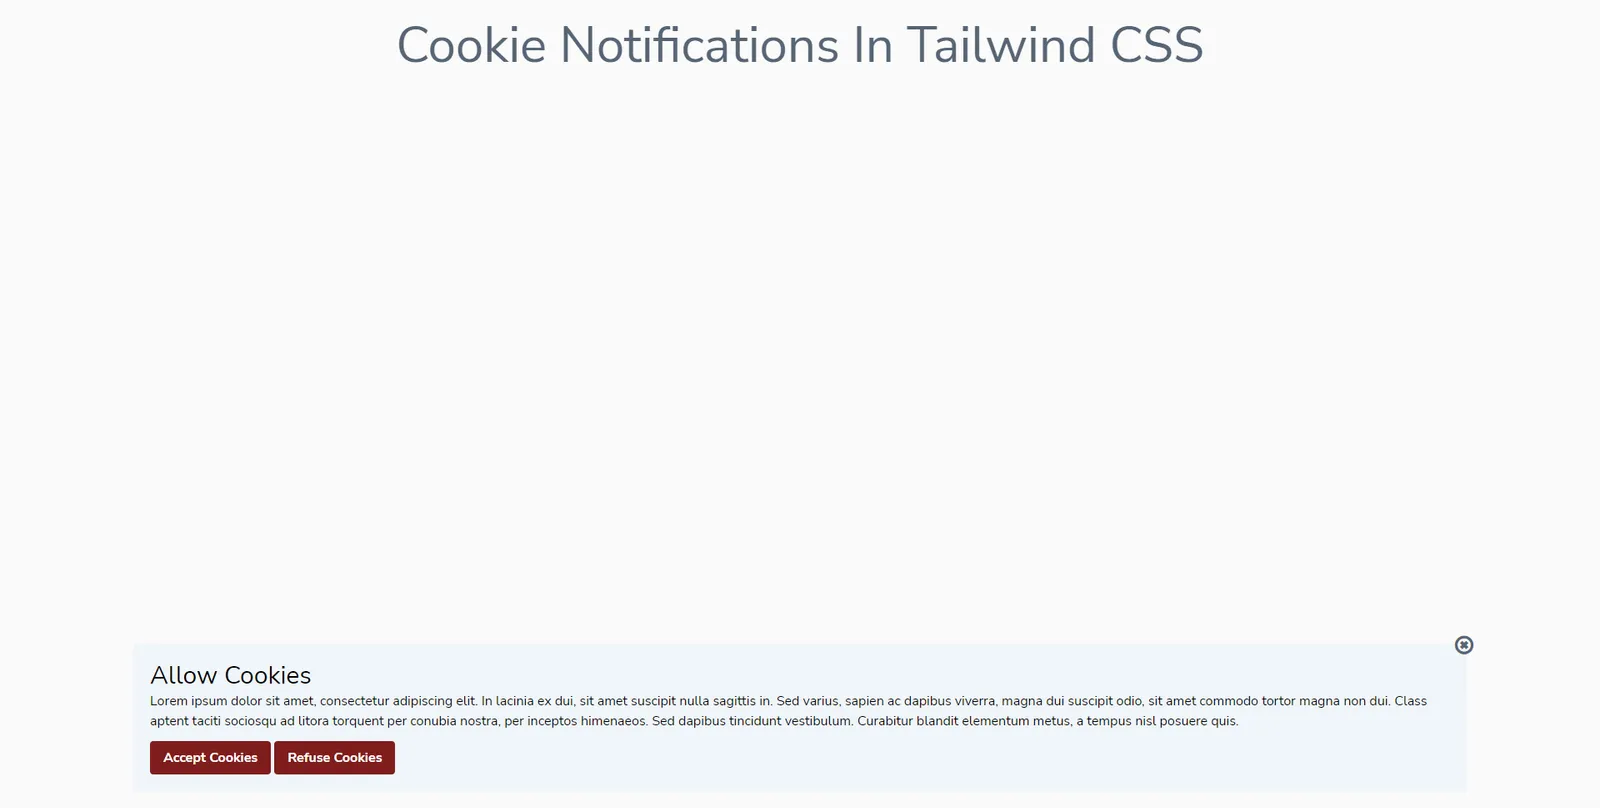 Cookies Notifications In Tailwind CSS